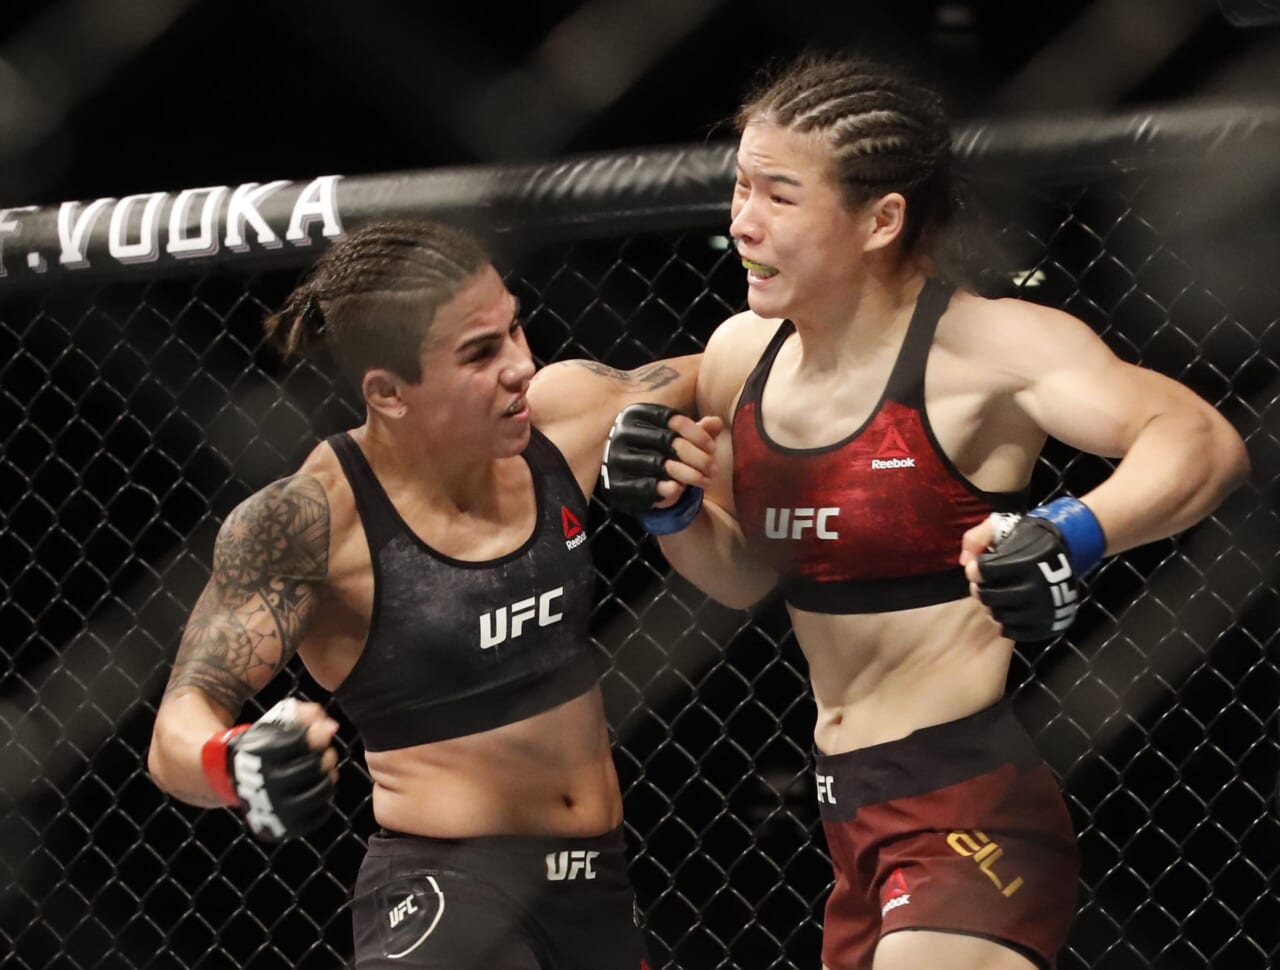 Katlyn Chookagian out, Jessica Andrade in to face Manon Fiorot at UFC Paris